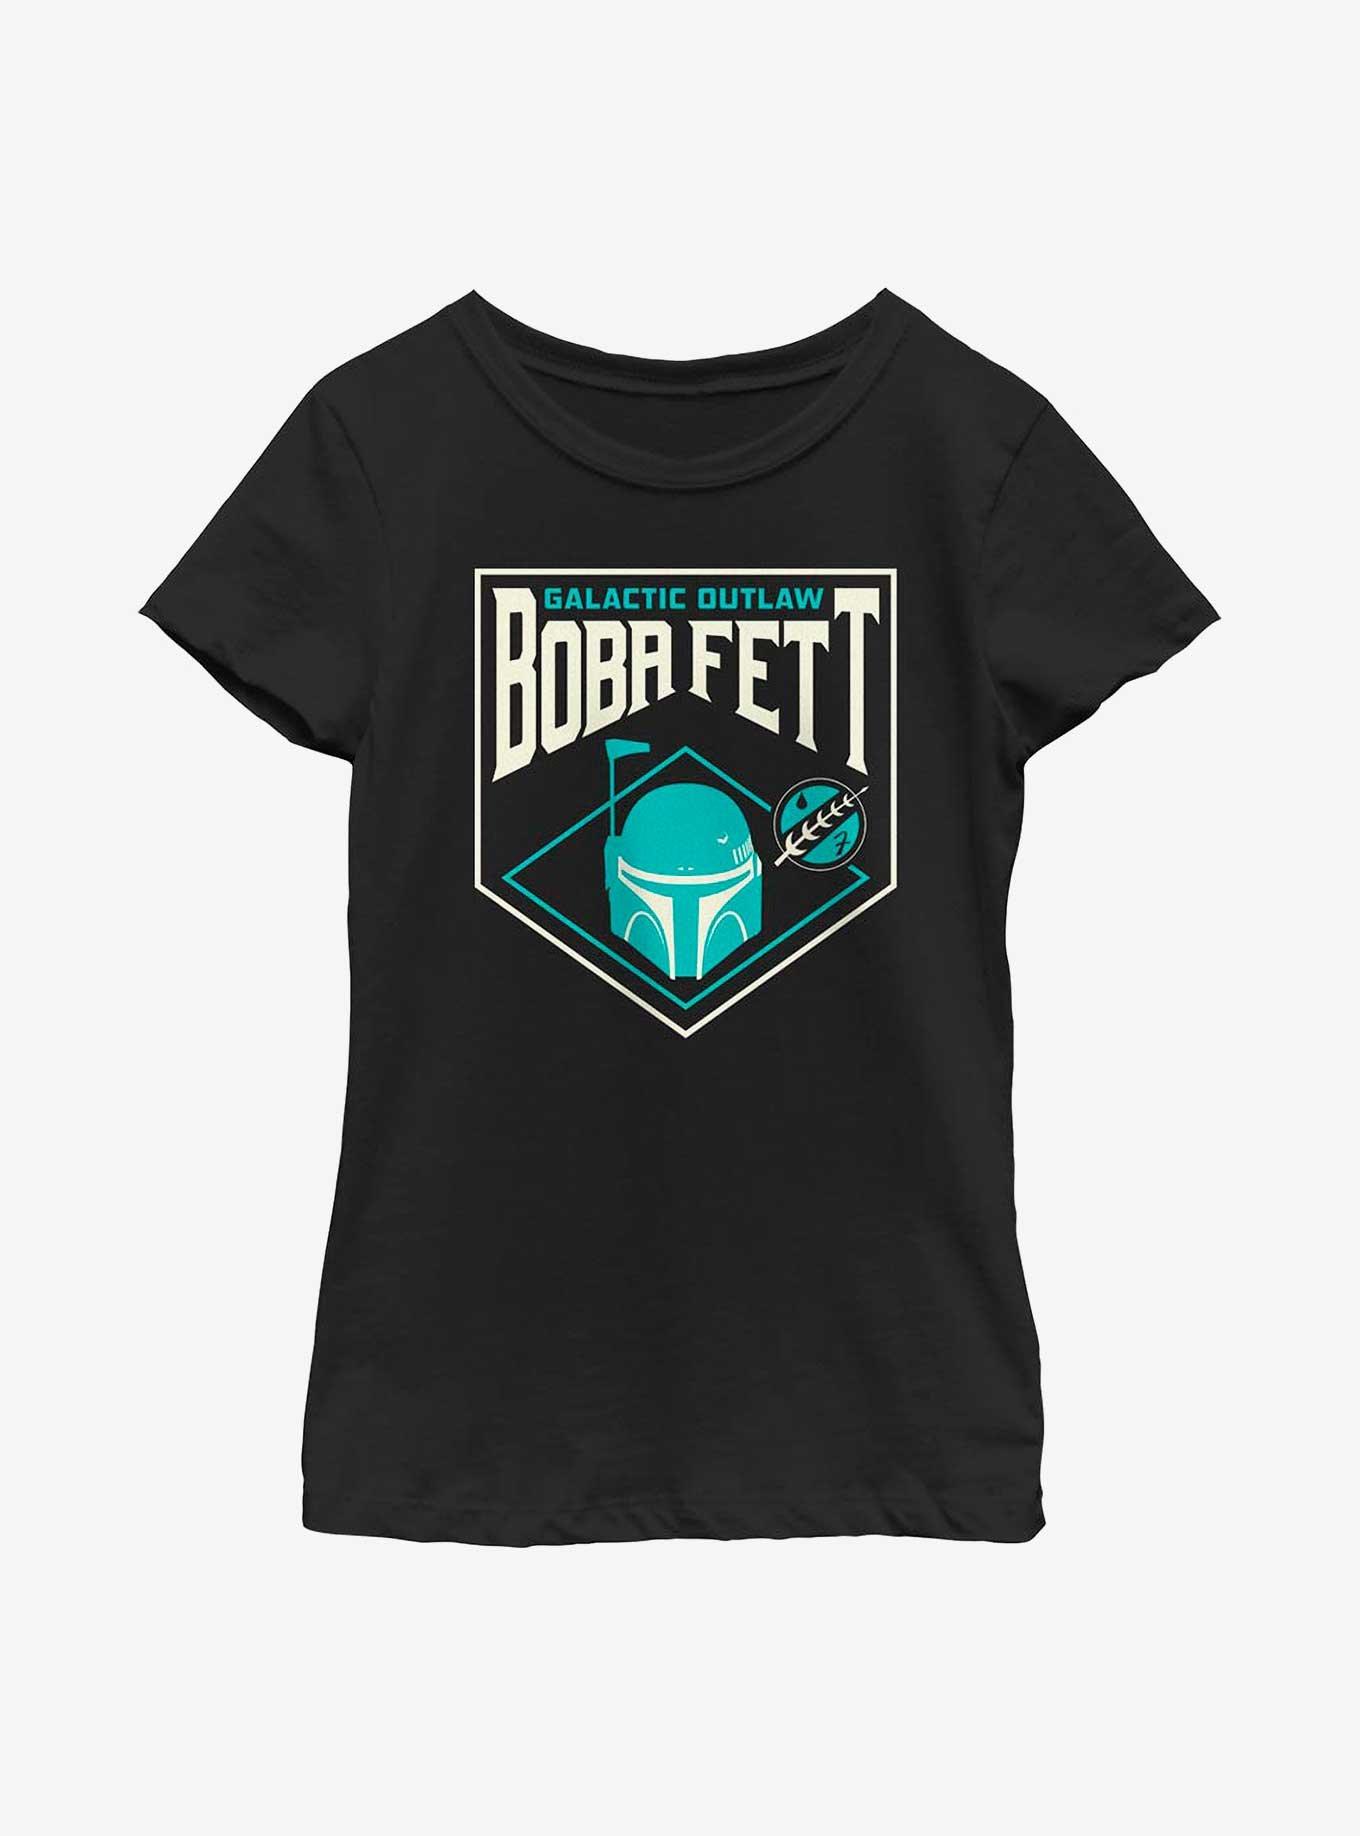 Star Wars: The Book Of Boba Fett Galactic Outlaw Badge Youth Girls T-Shirt, BLACK, hi-res